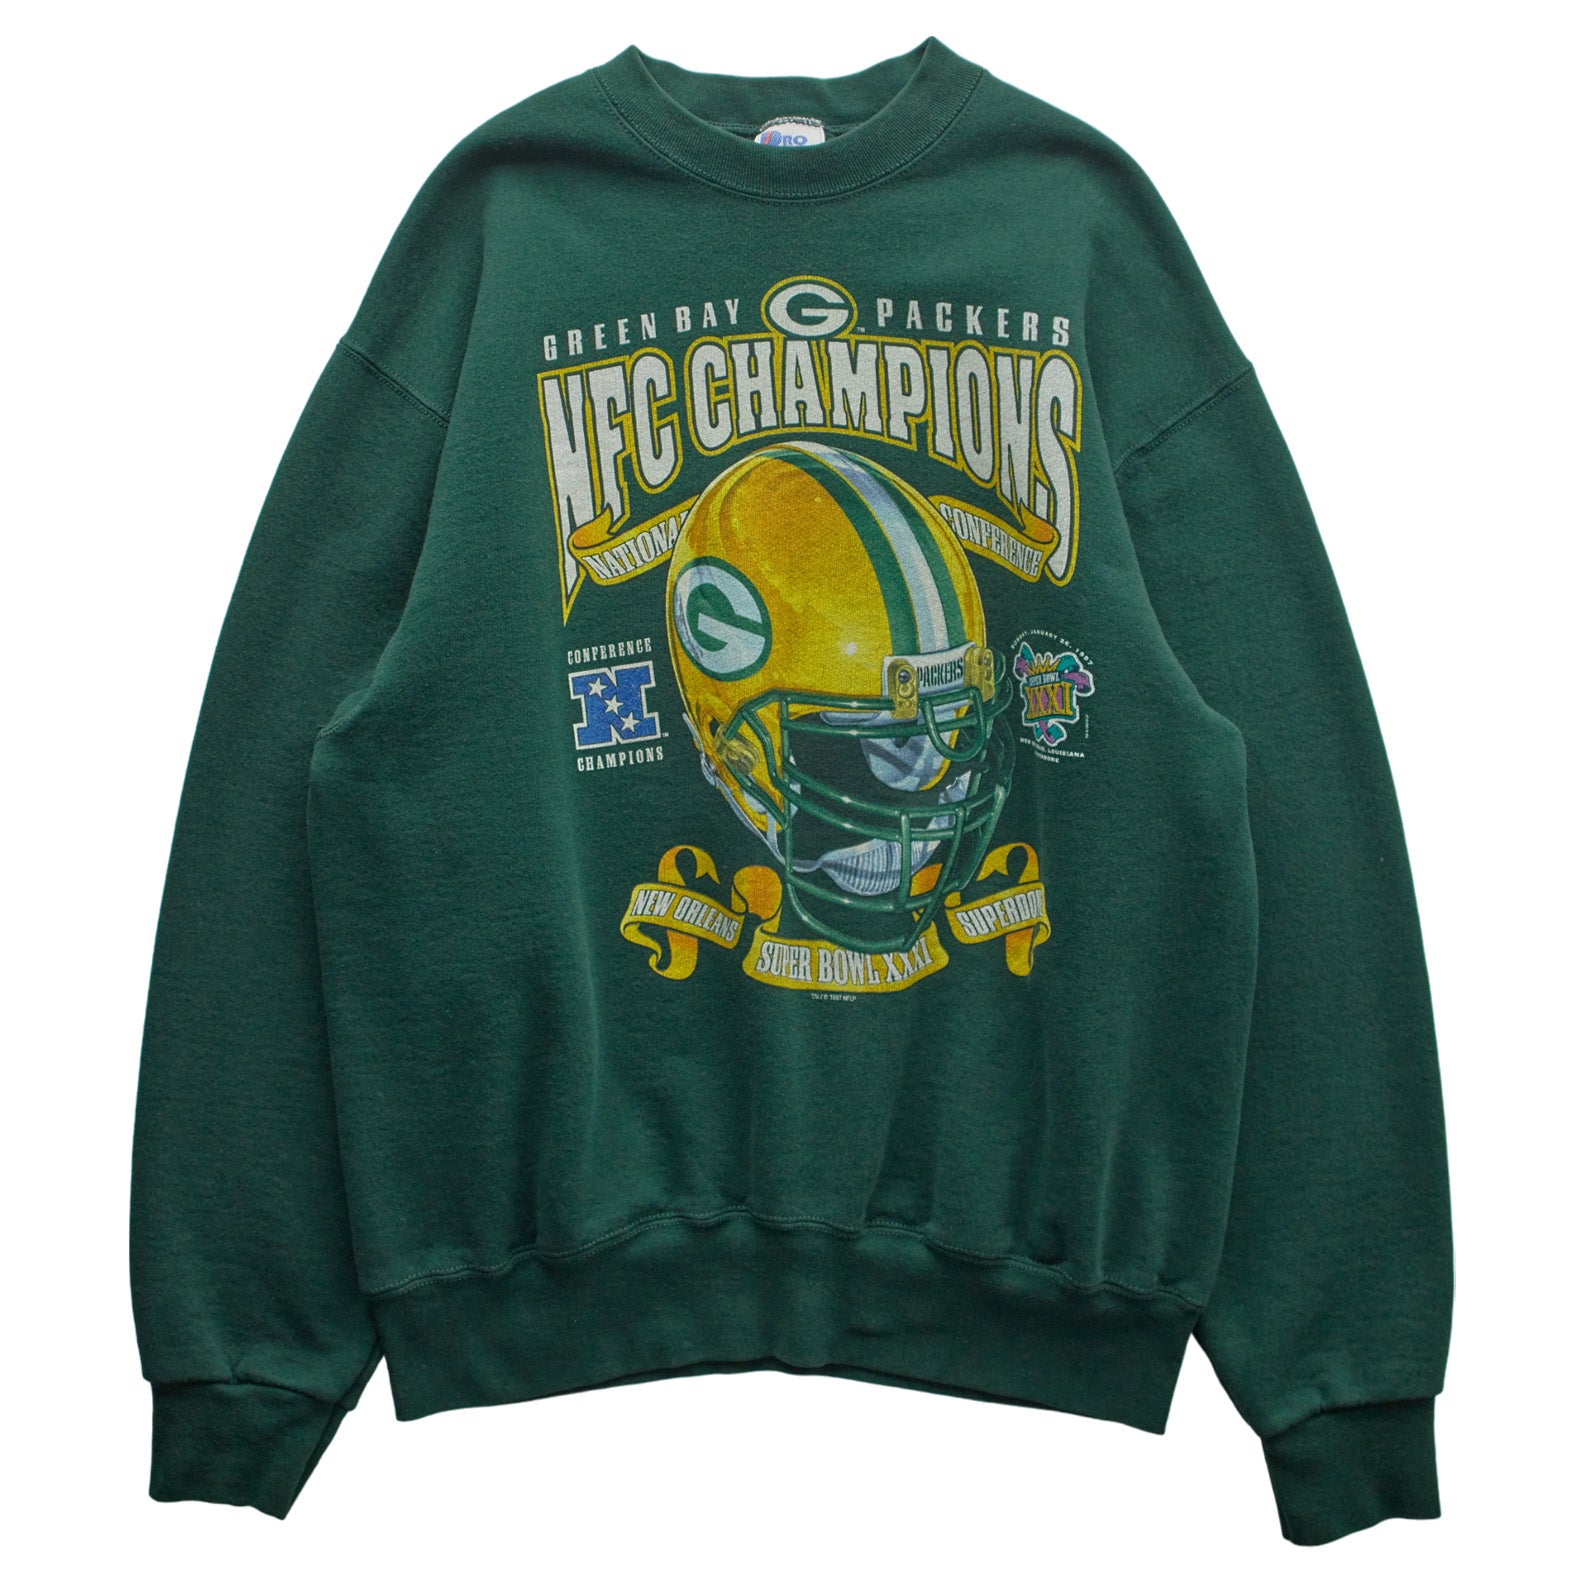 (L) 90s Green Bay Packers